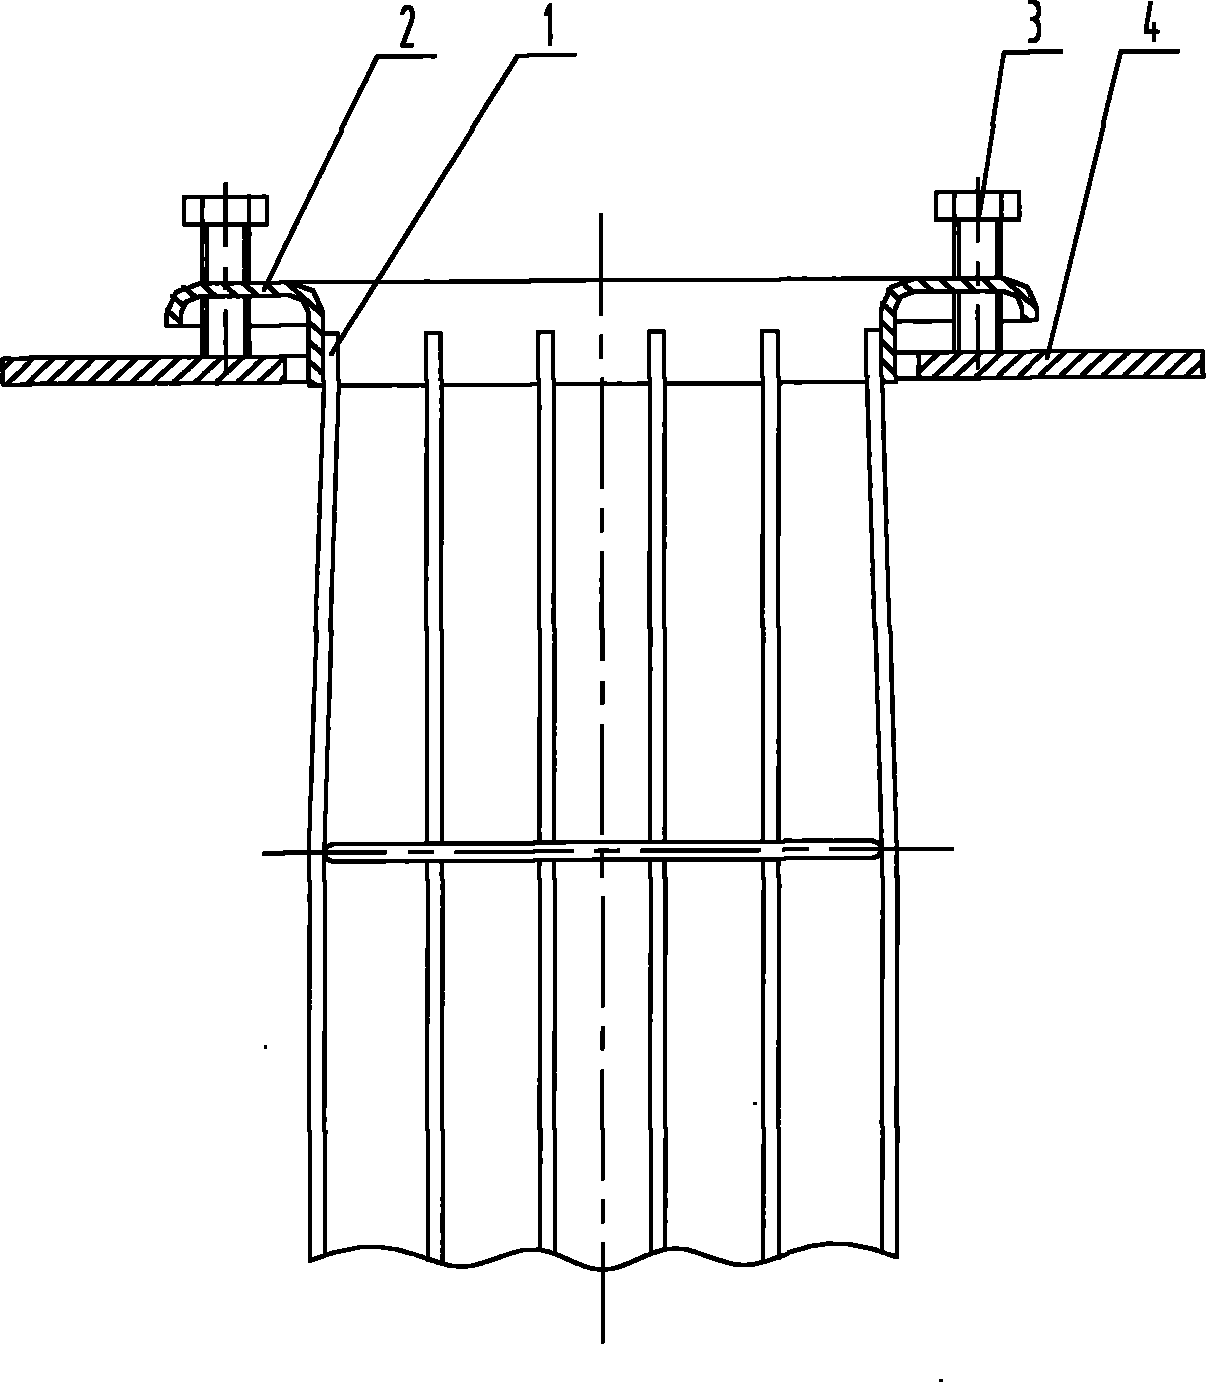 Self-aligning cage structure for bag type dust collector